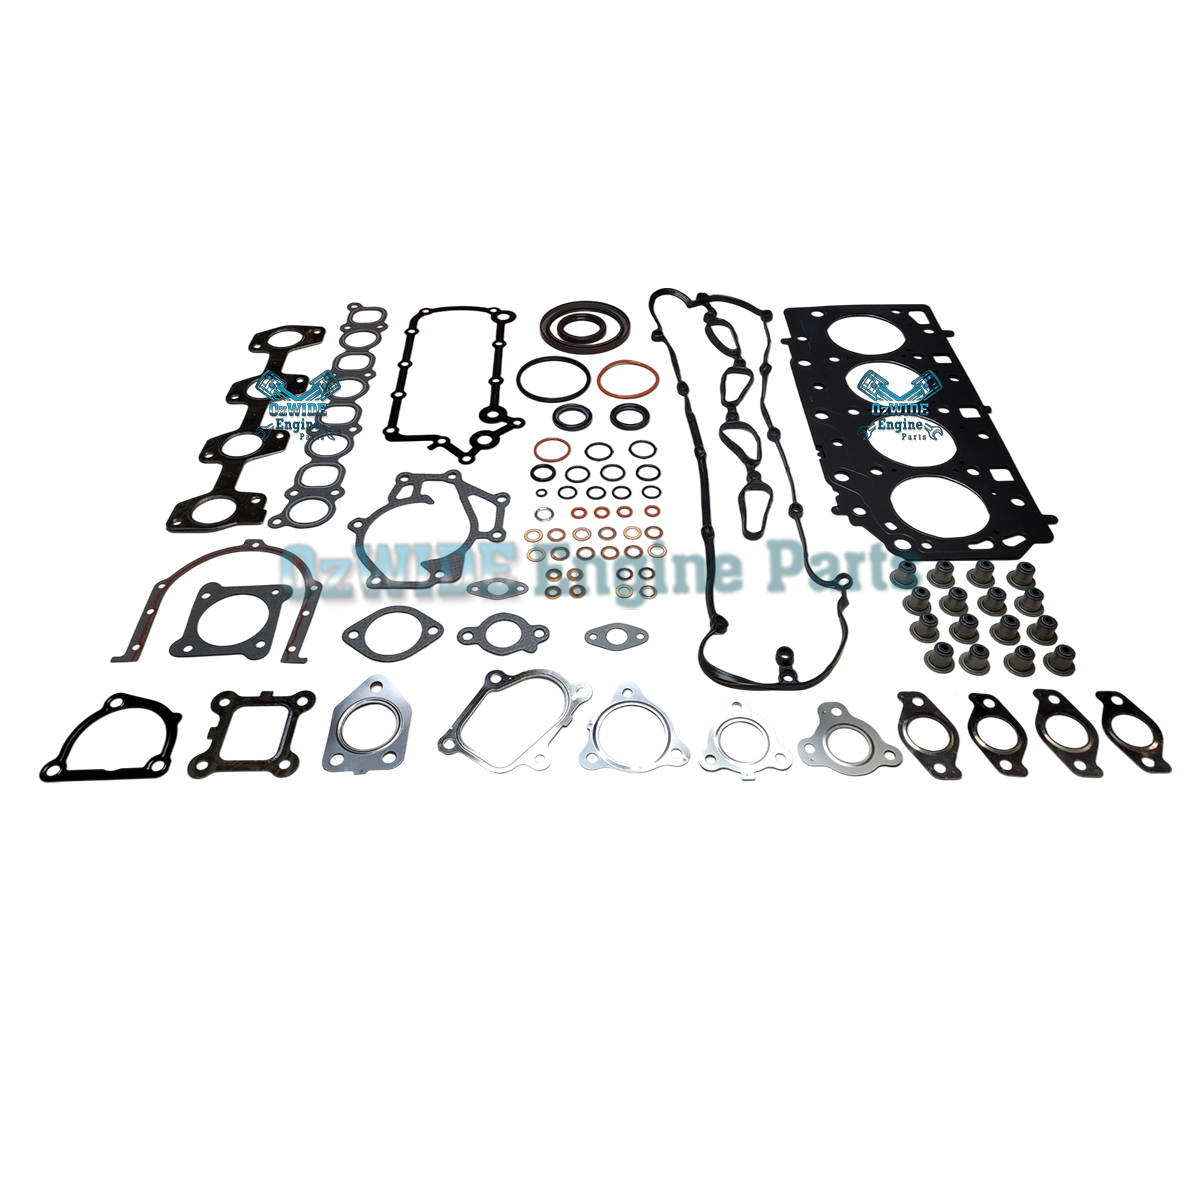 Hyundai iLoad D4CB Full Gasket Set suits early model up to 2012 model.